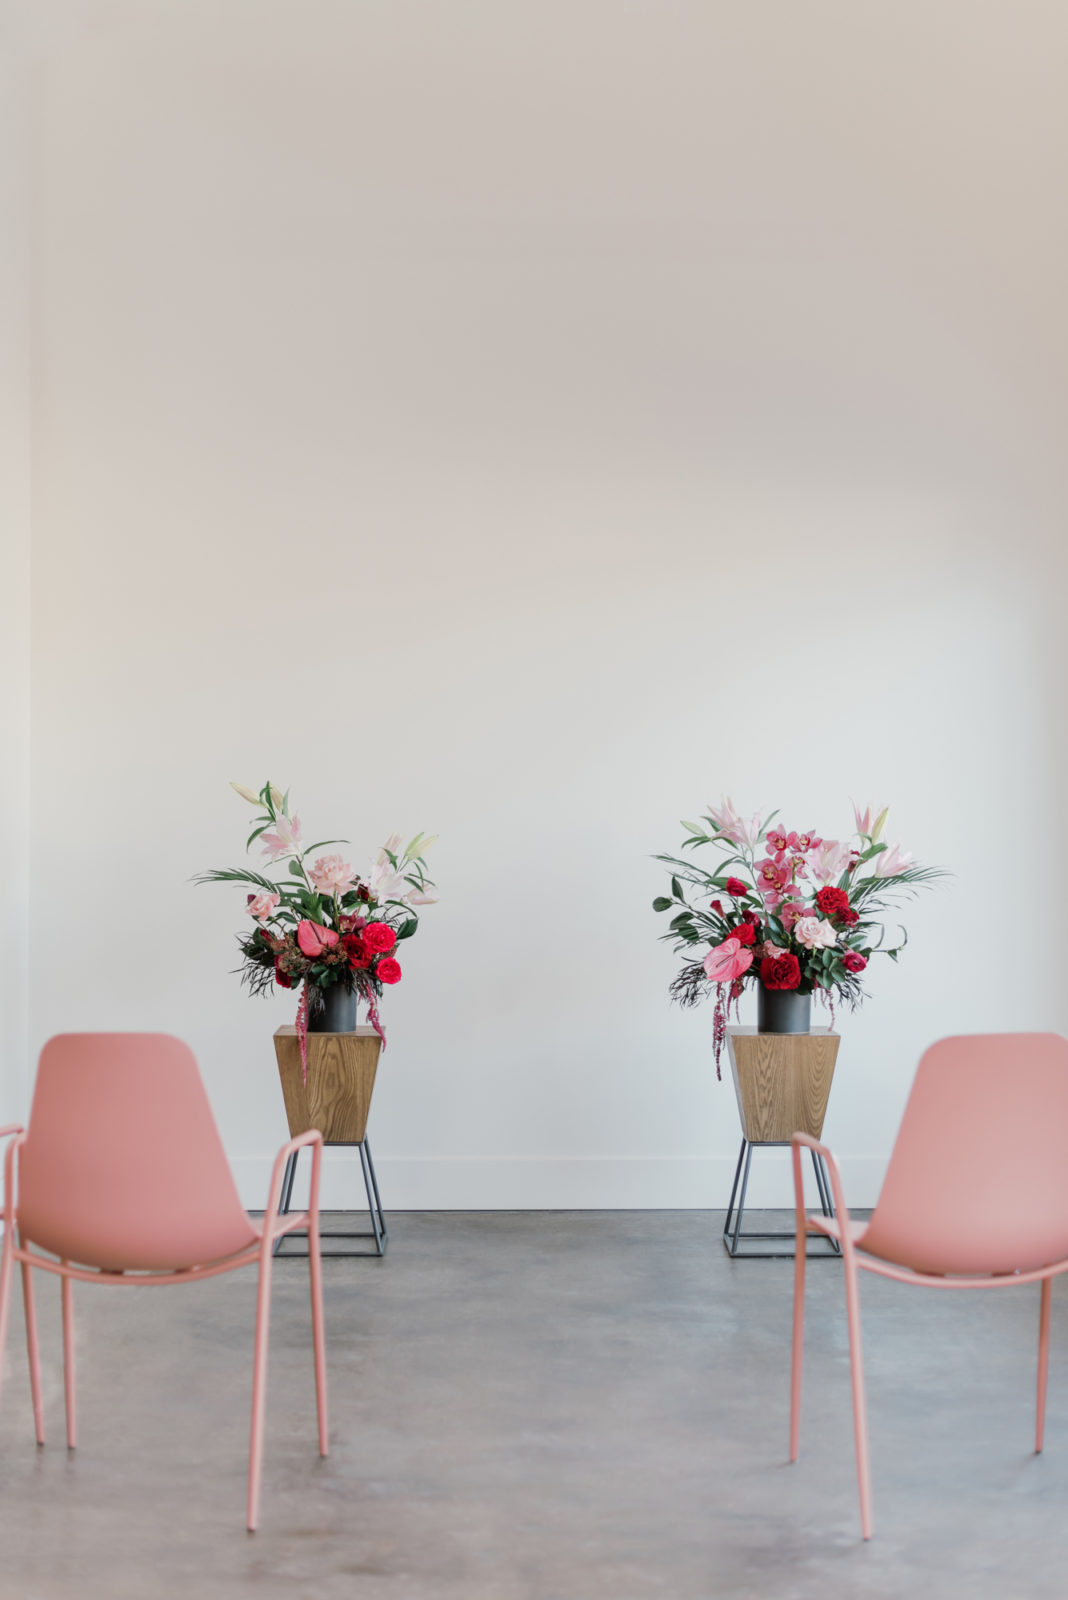 Modern microwedding inspiration with berry florals and pink chairs